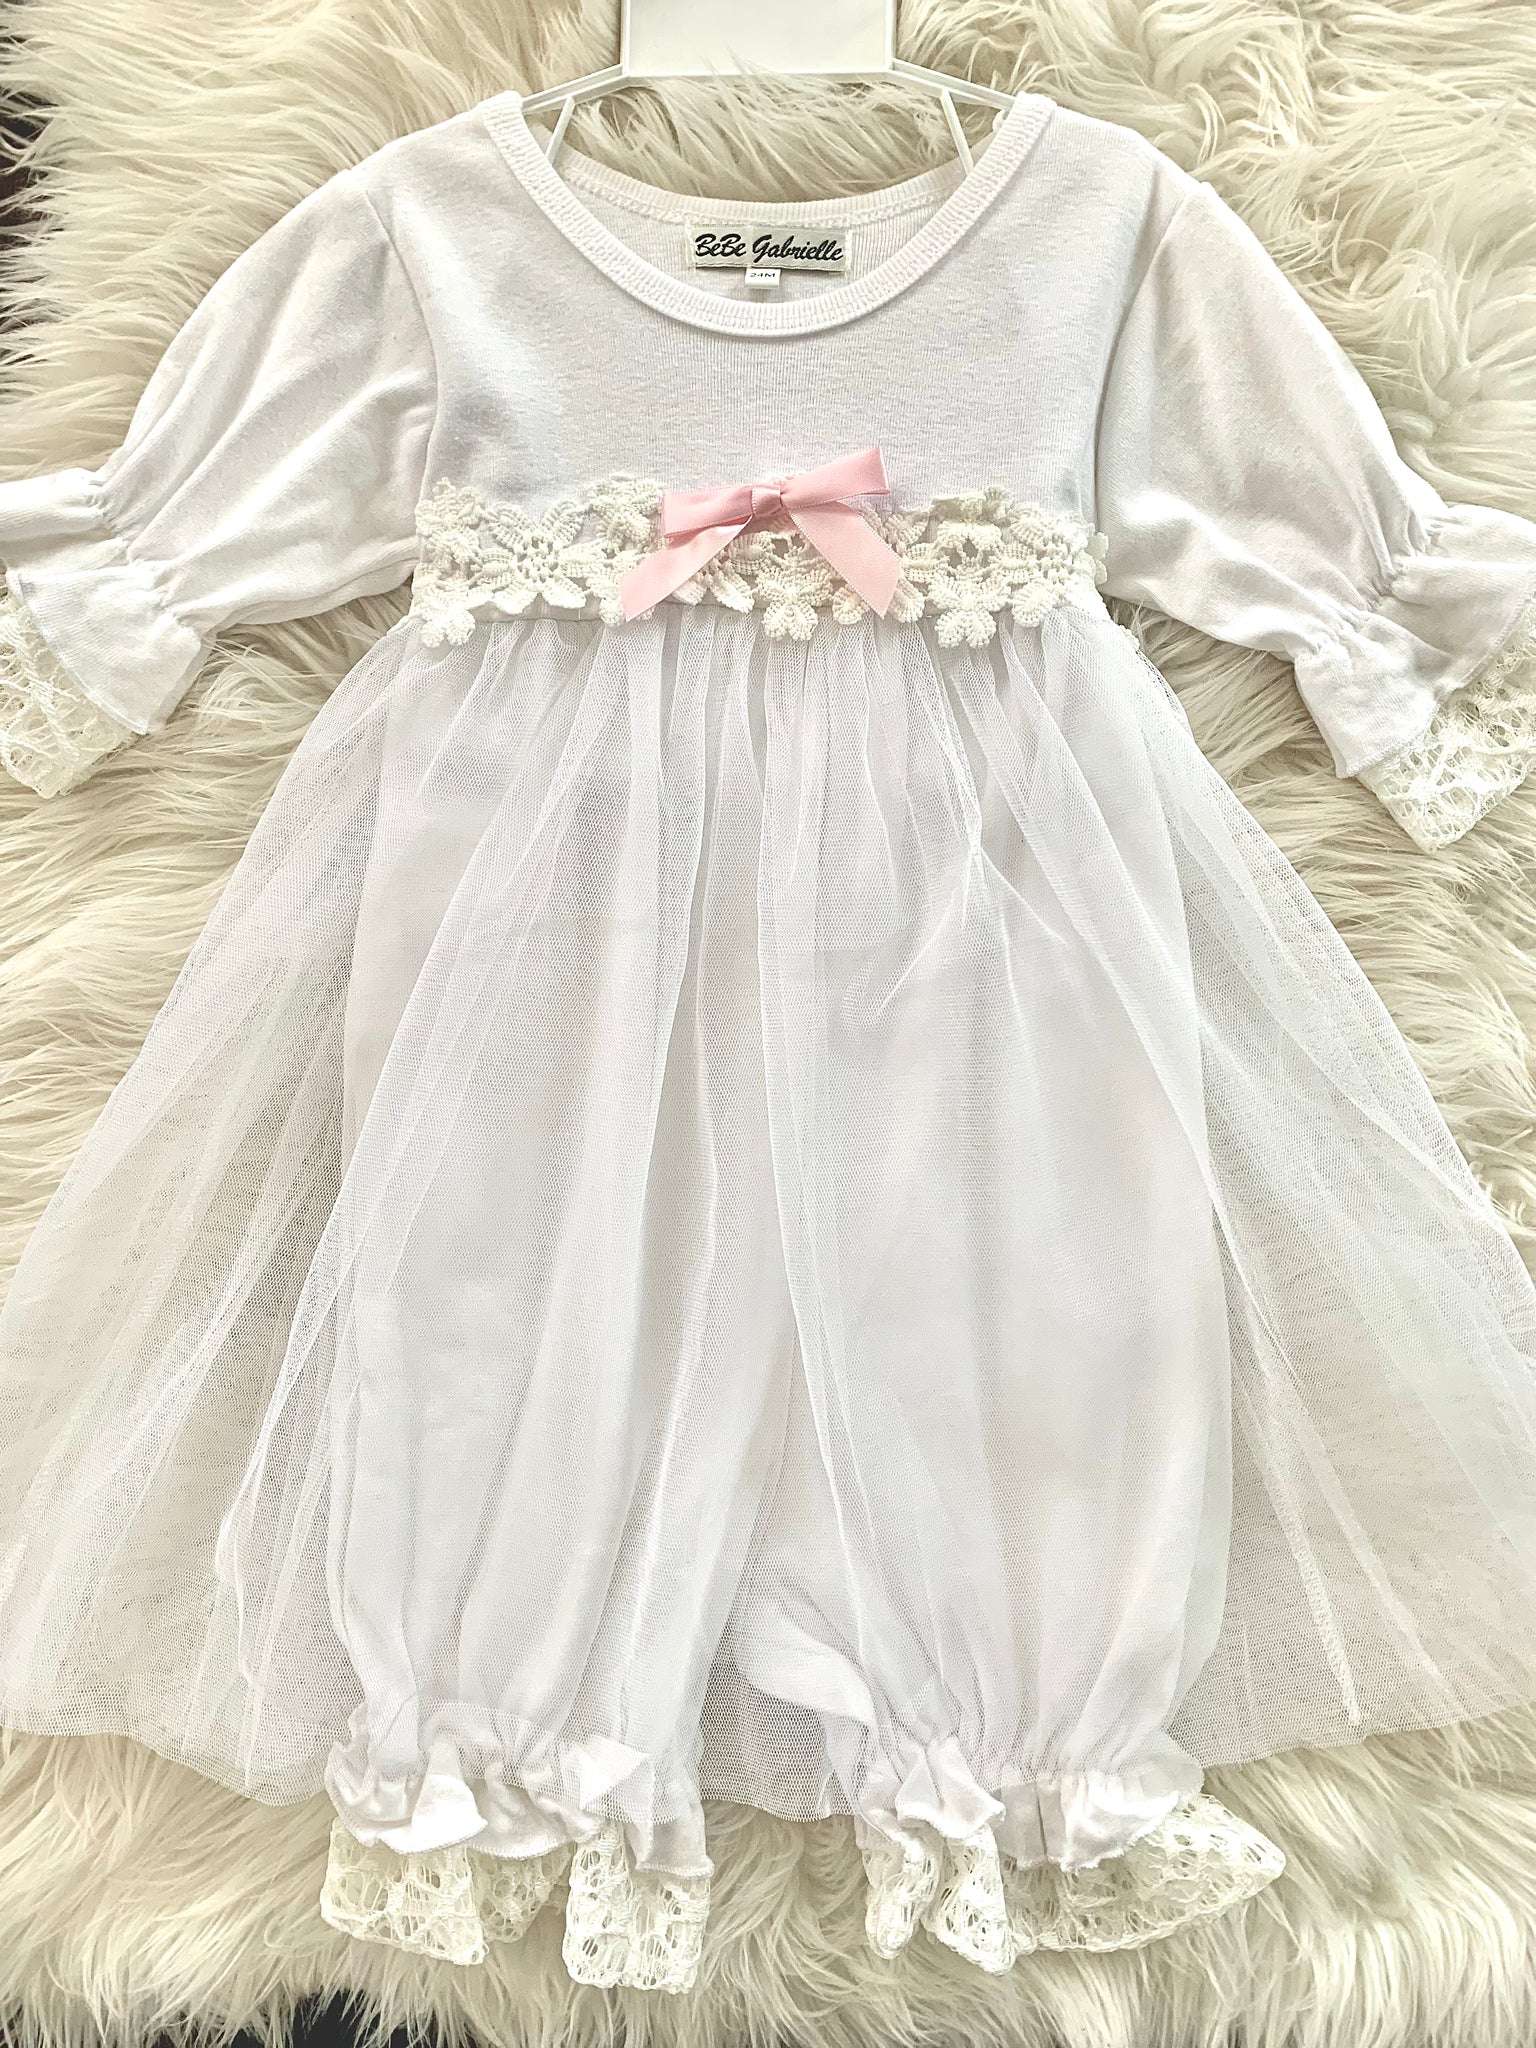 White Lace and Pink Cotton Dress with Bloomers